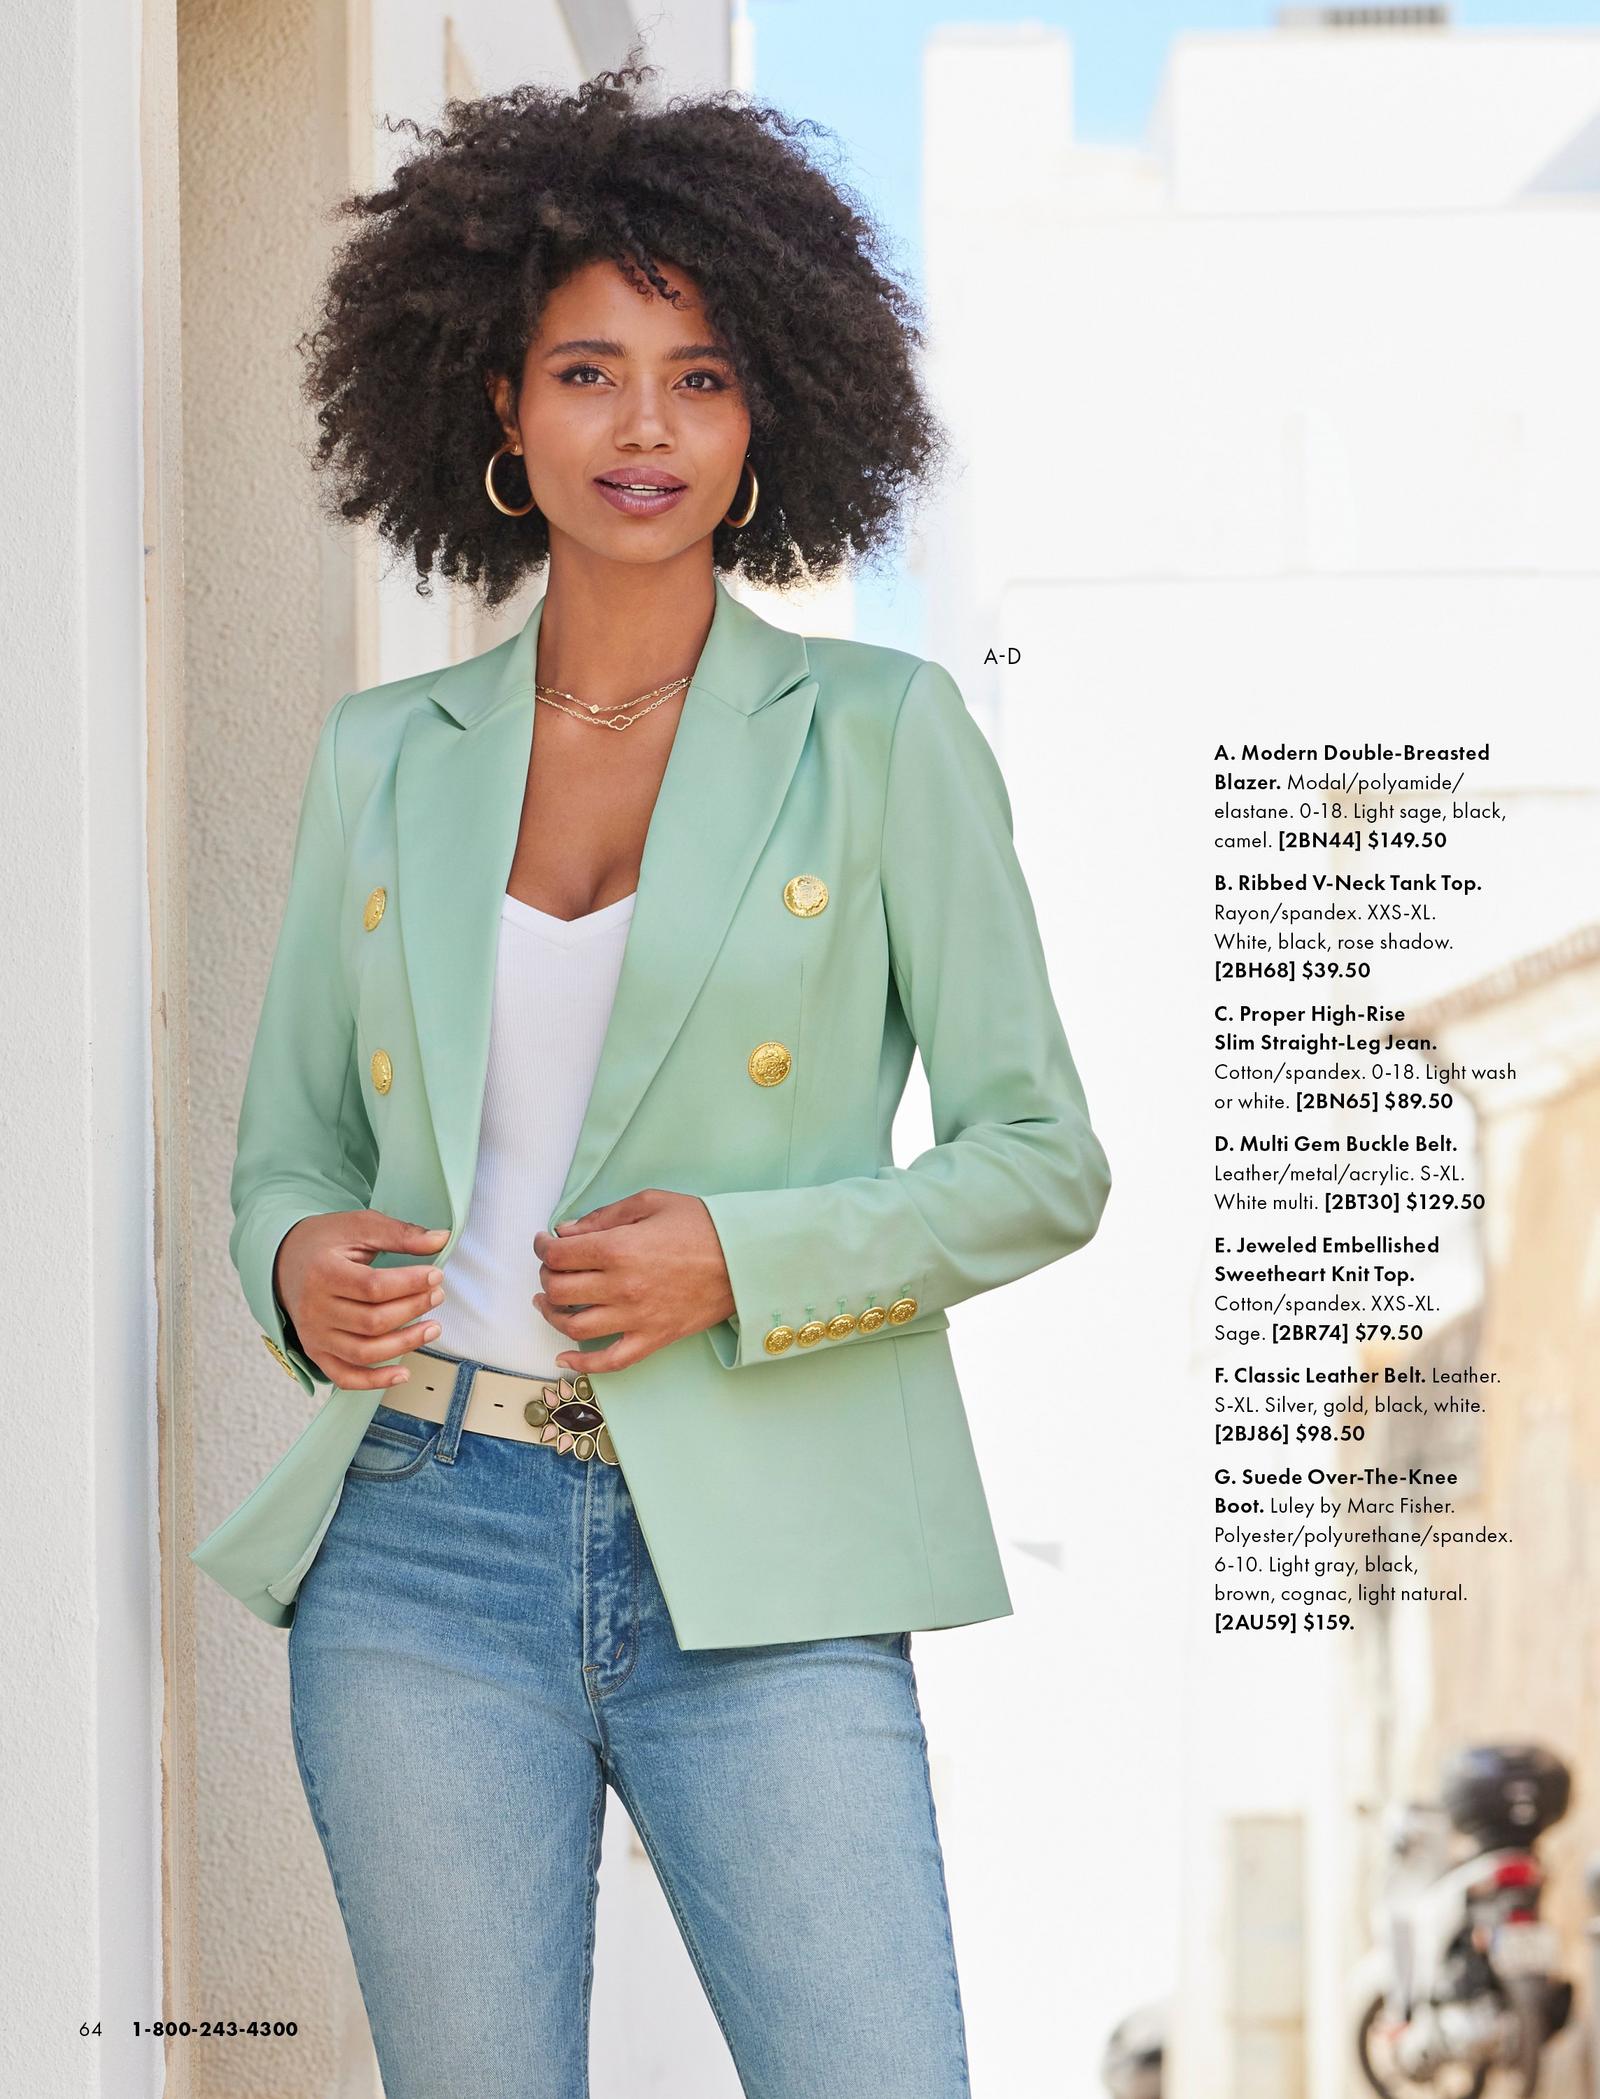 model wearing a sage double-breasted blazer, white top, stone embellished belt, jeans, and gold hoop earrings.